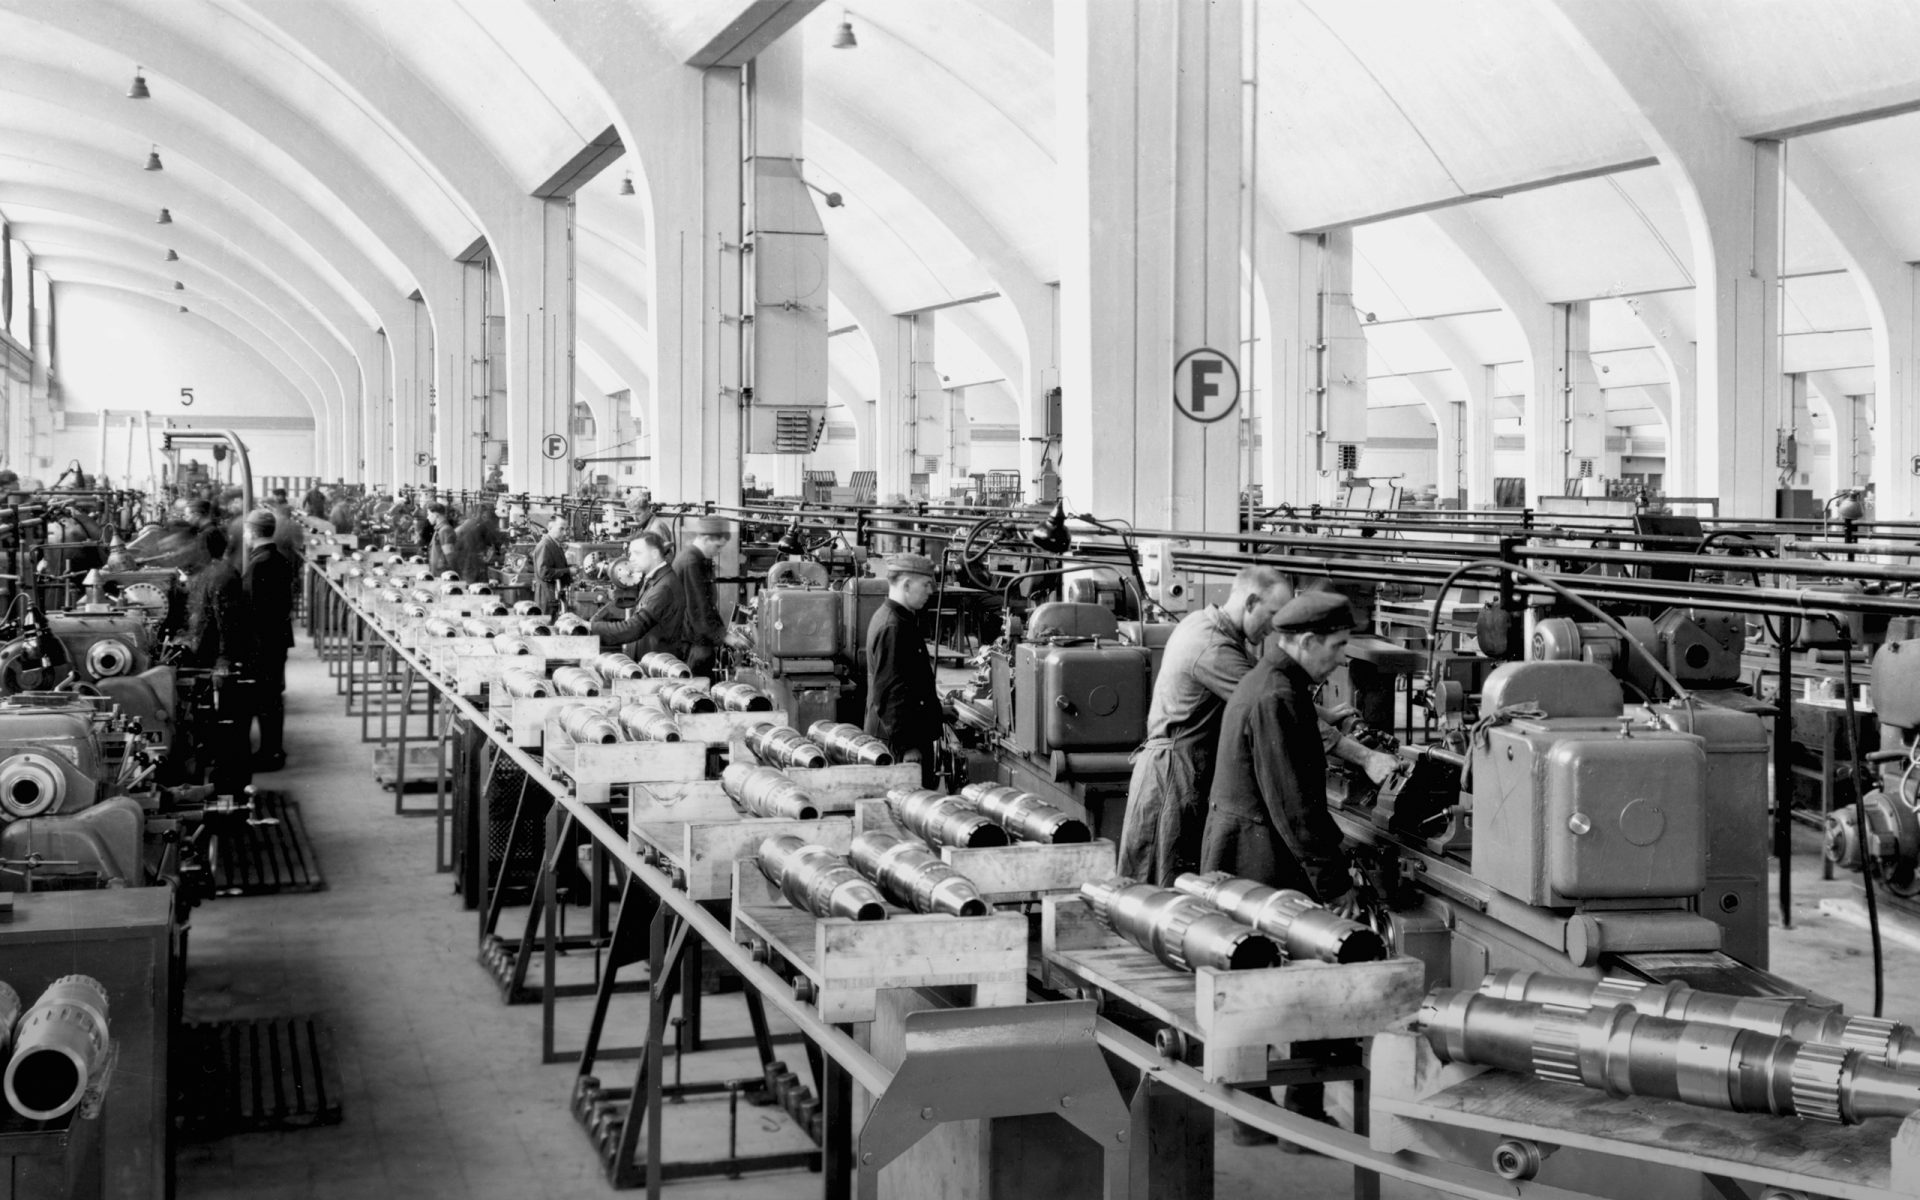 Forced labour at BMW during World War II.